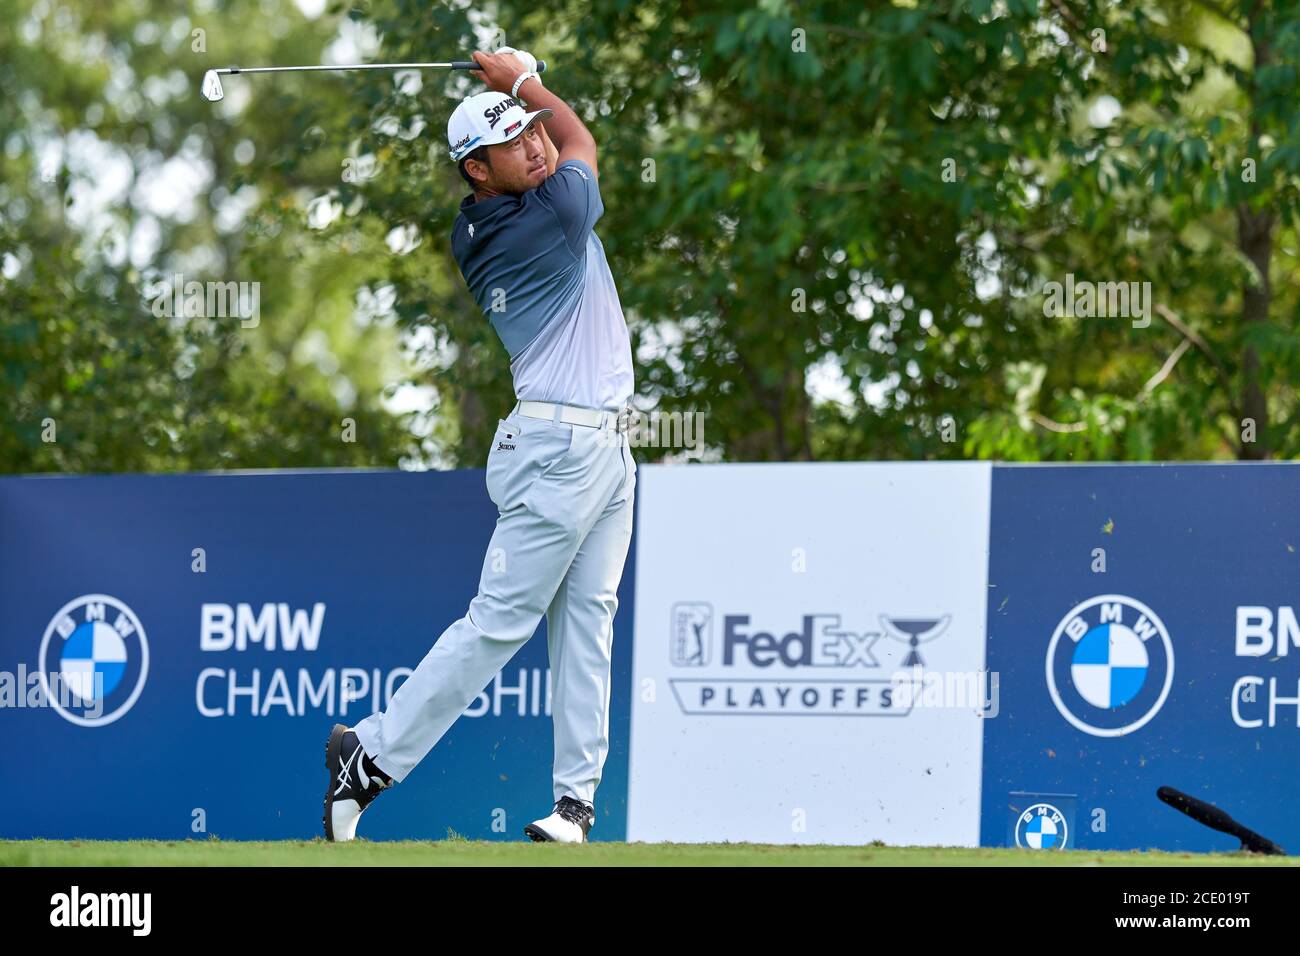 OLYMPIA FIELDS, IL - AUGUST 29: Hideki Matsuyama of Japan hits his tee shot at the 16th hole during the third round of the BMW Championship at Olympia Fields Country Club (North) Stock Photo